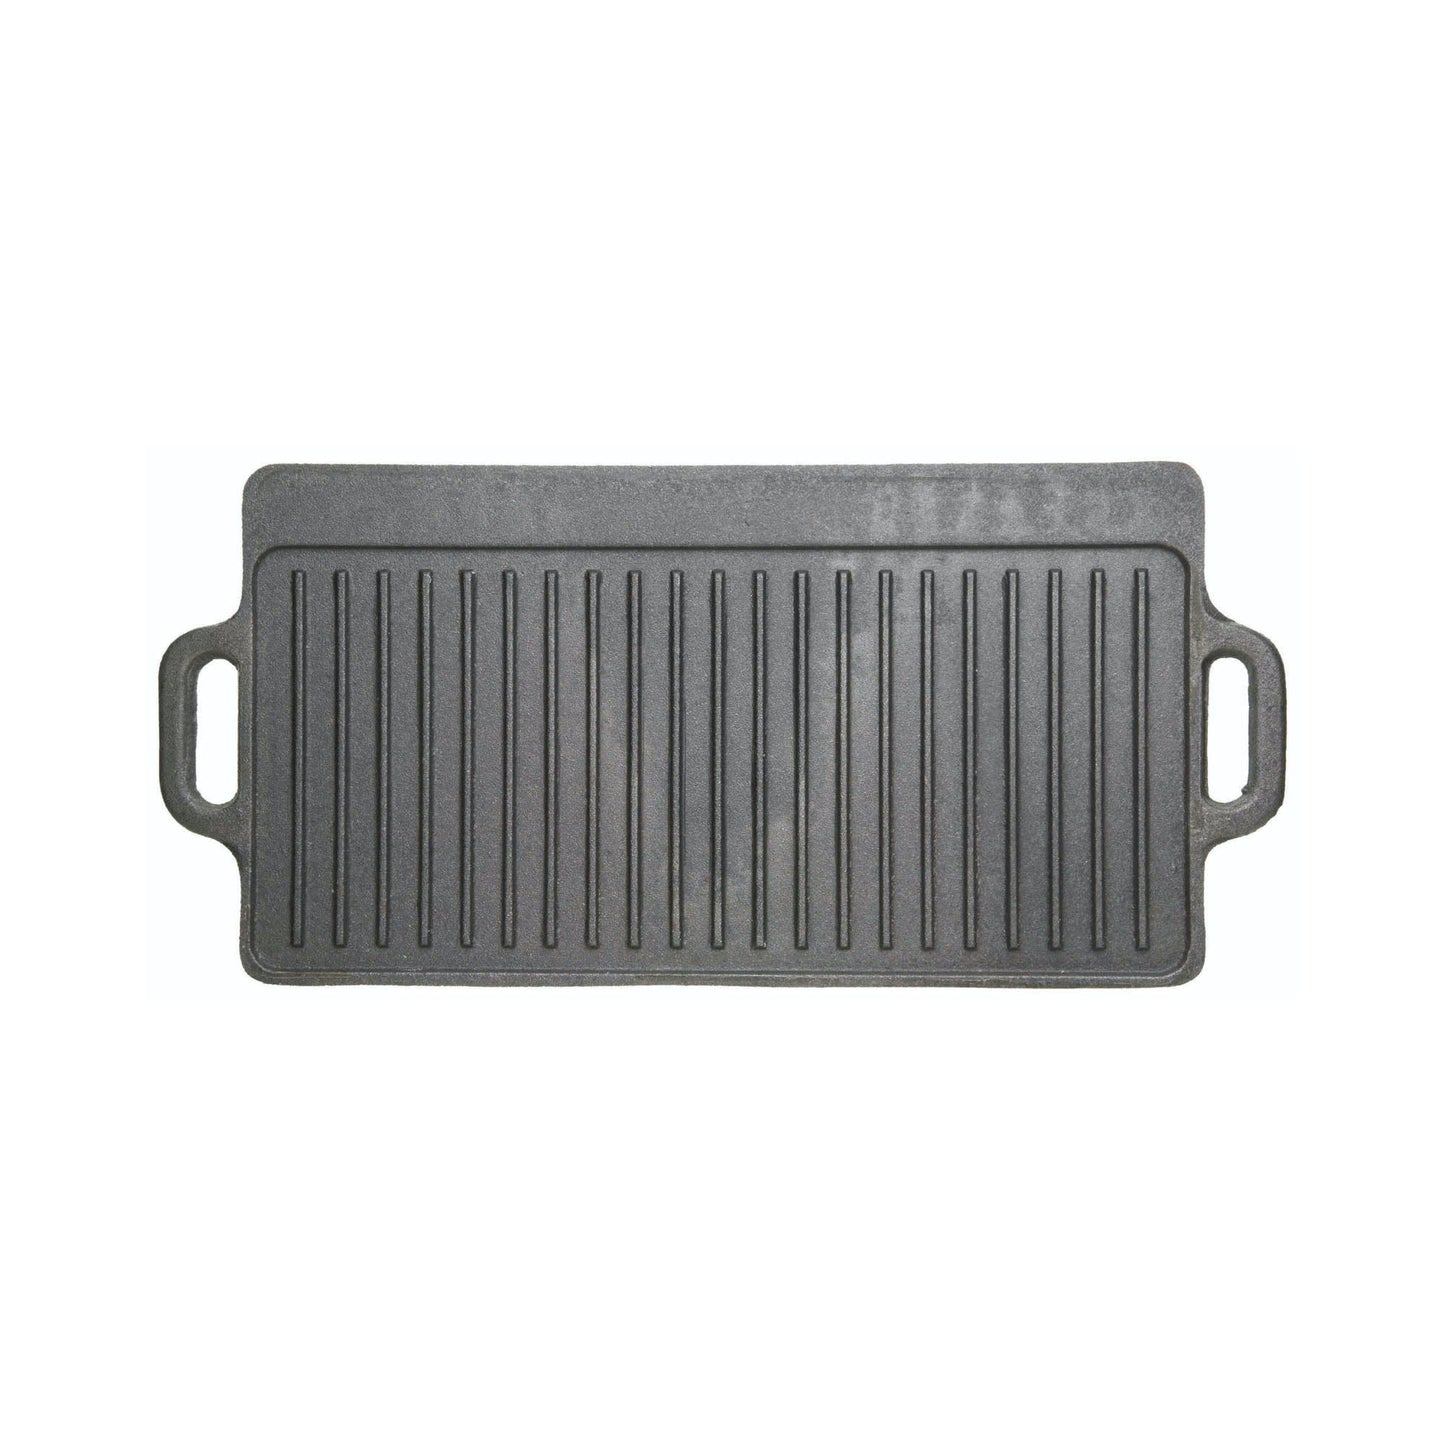 Deluxe Cast Iron Griddle